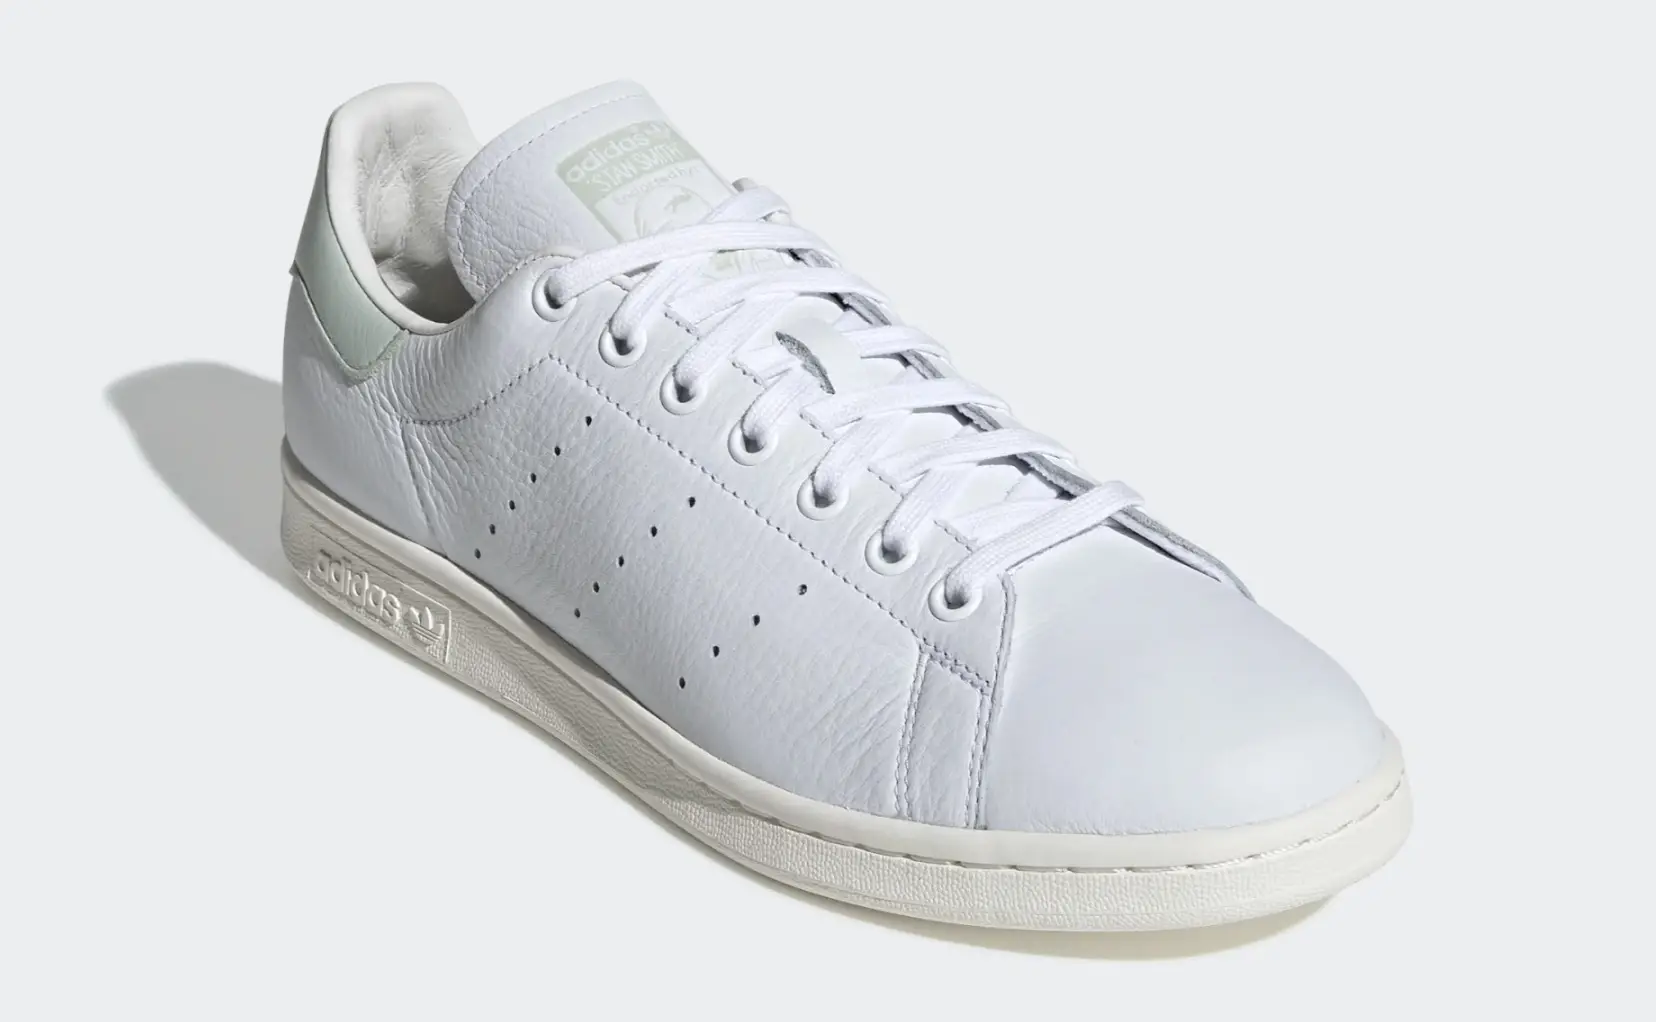 Pastel Heel Panels Renew adidas' Stan Smith Silhouette | The Sole Supplier